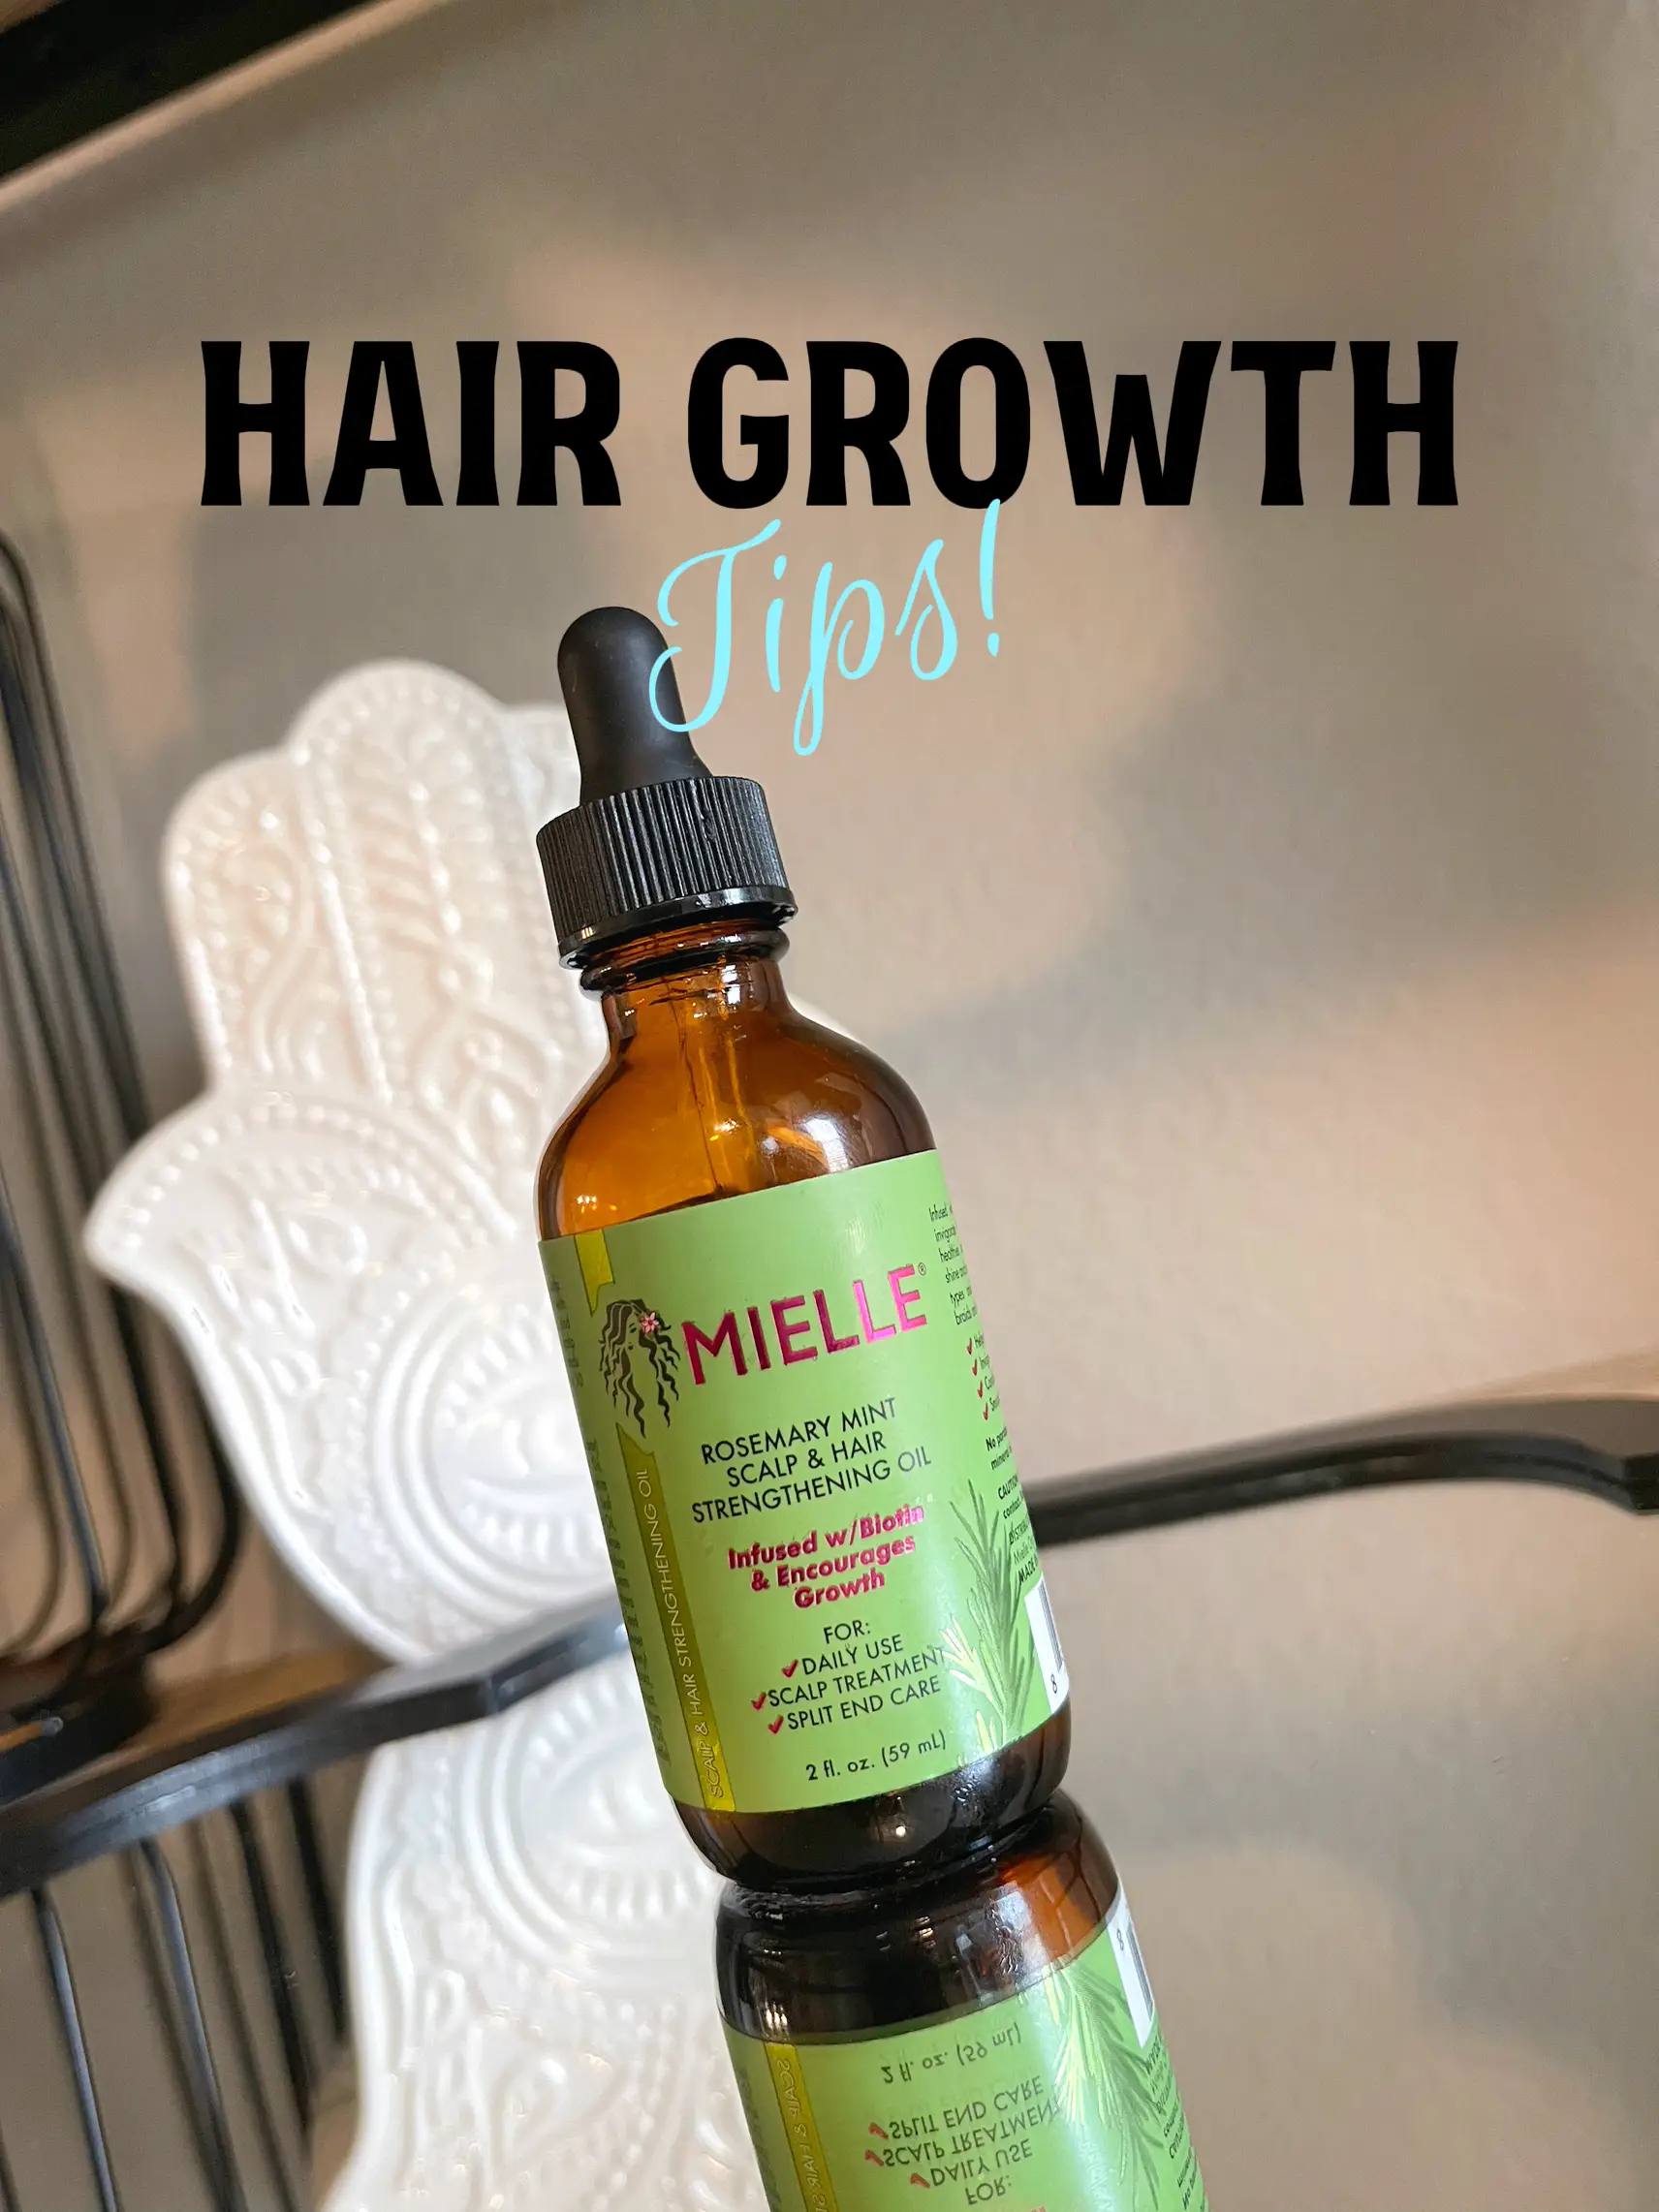 Mielle Organics - Havey you tried our Rosemary Mint Oil? Its great for  those looking to grow your hair as it is infuesed with Biotion. Get your  hands on some today at